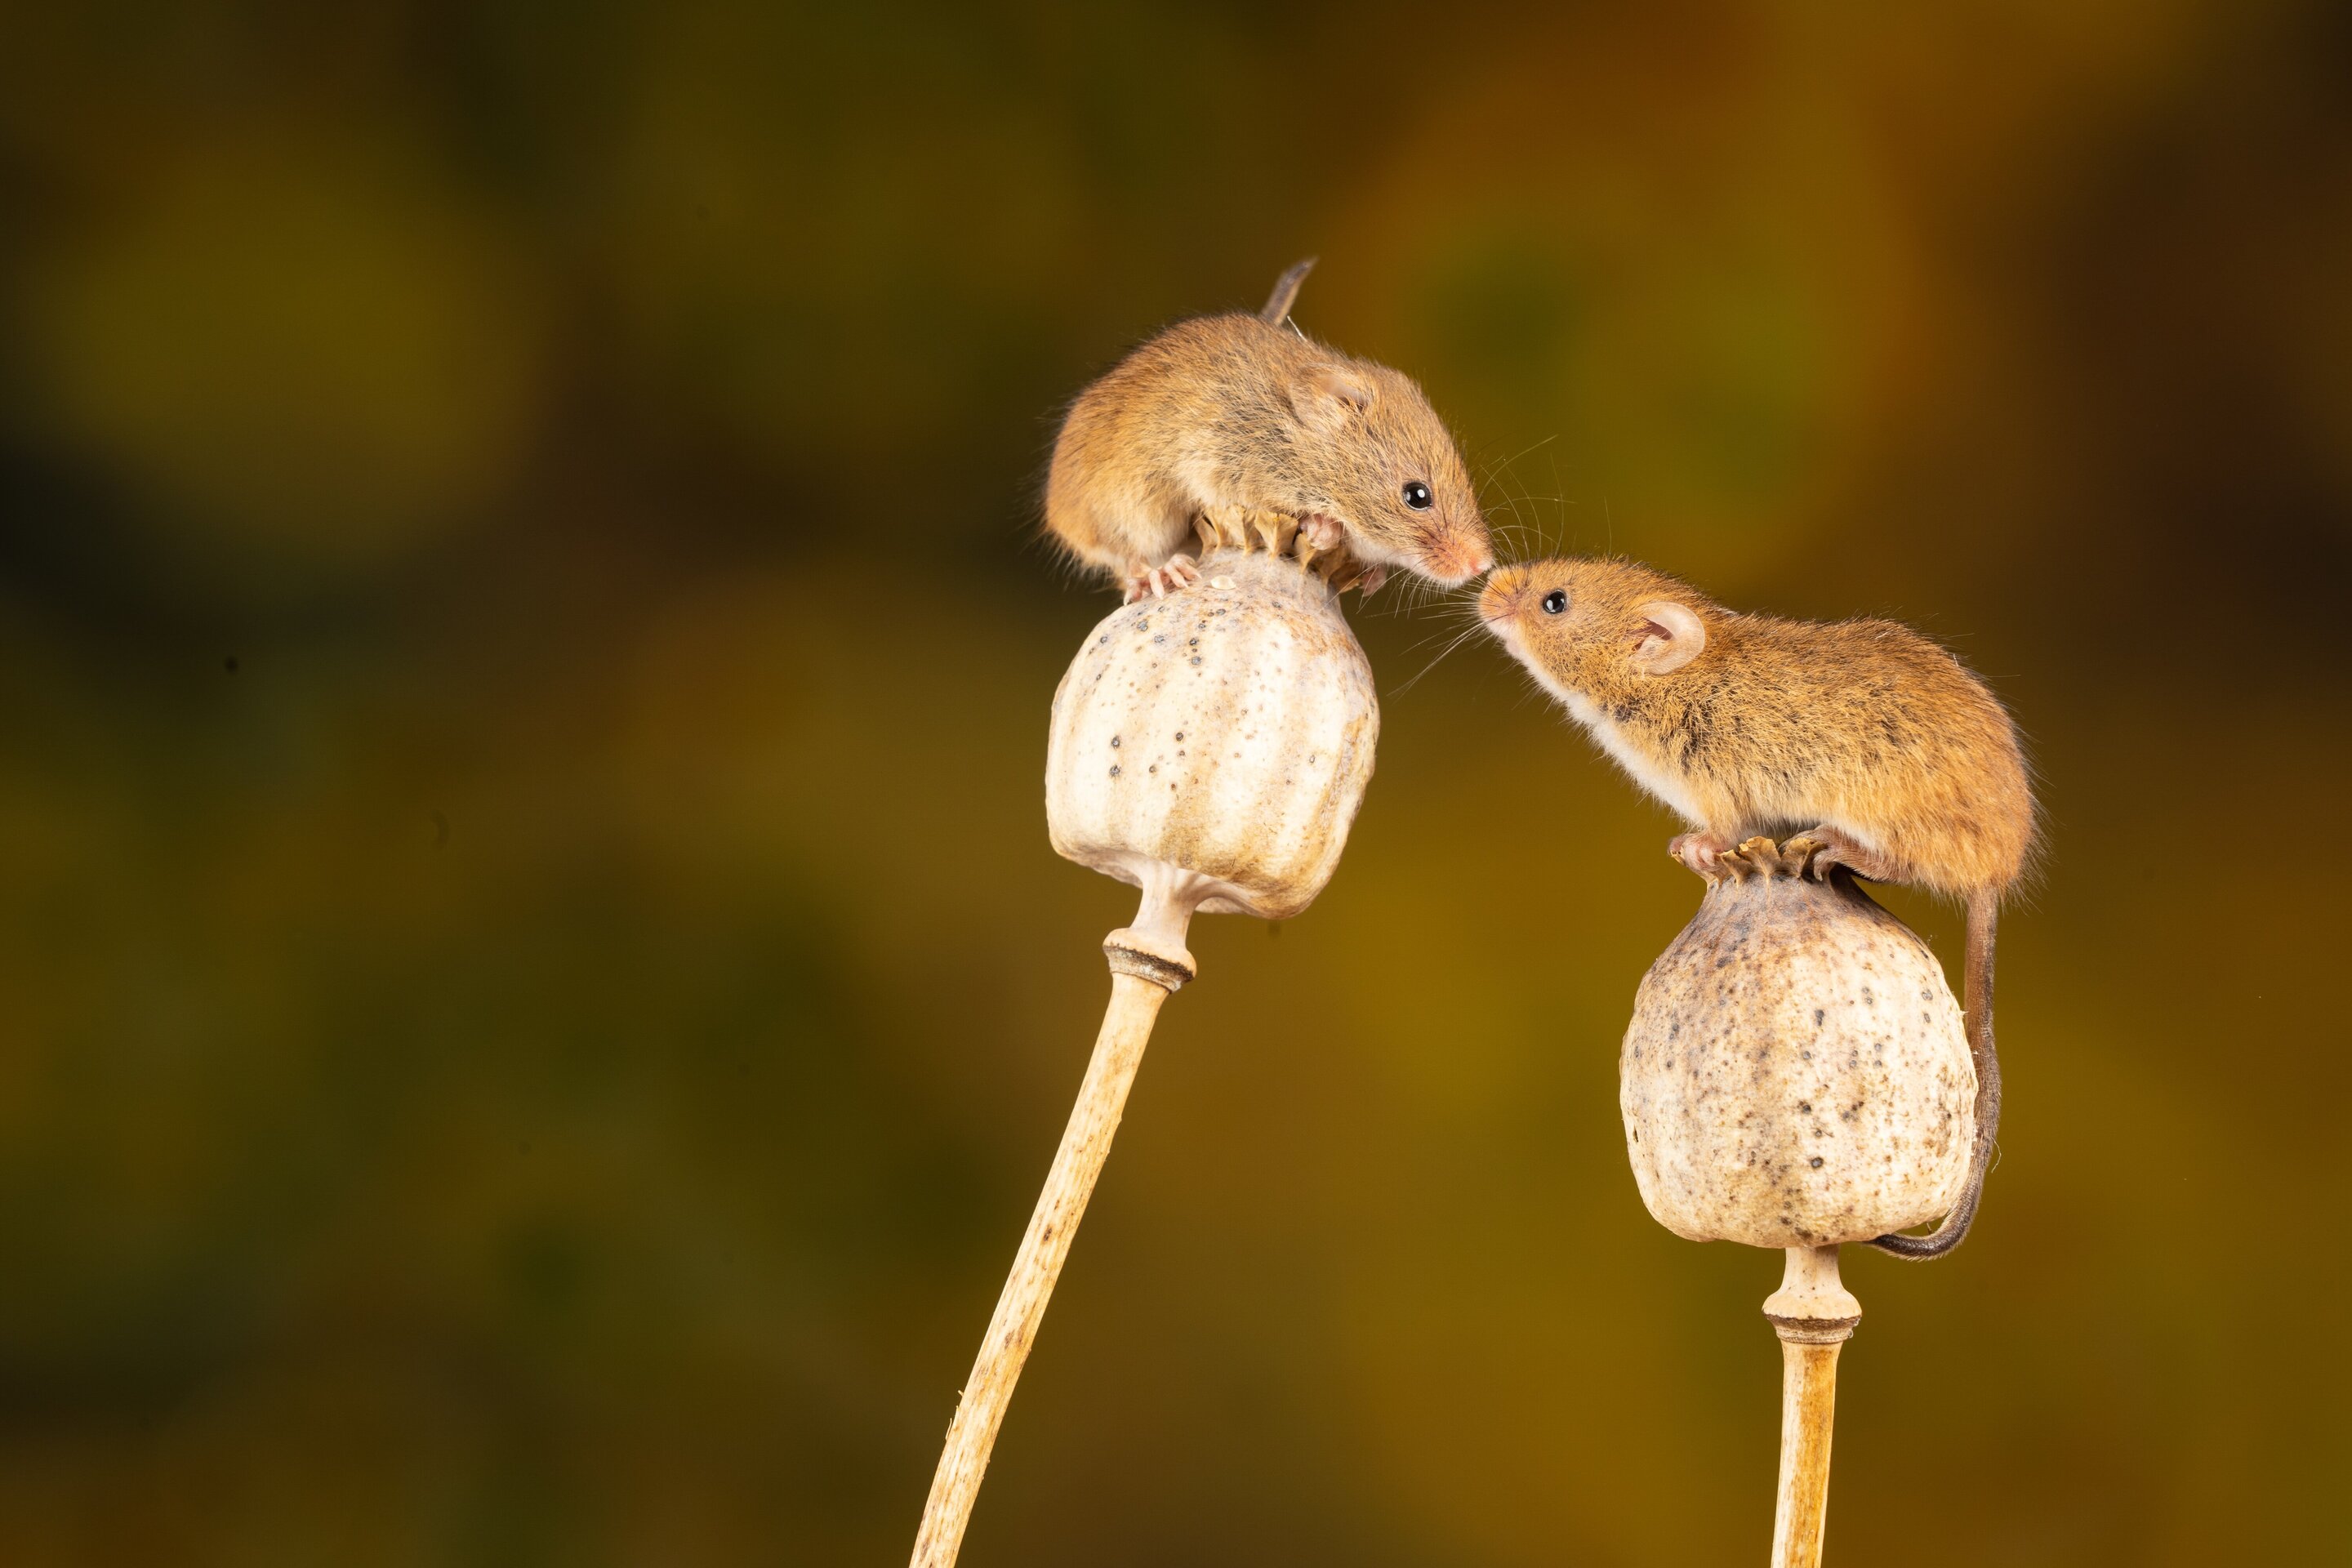 'Experienced' mouse mothers tutor other females to parent, helped by hormone oxy..